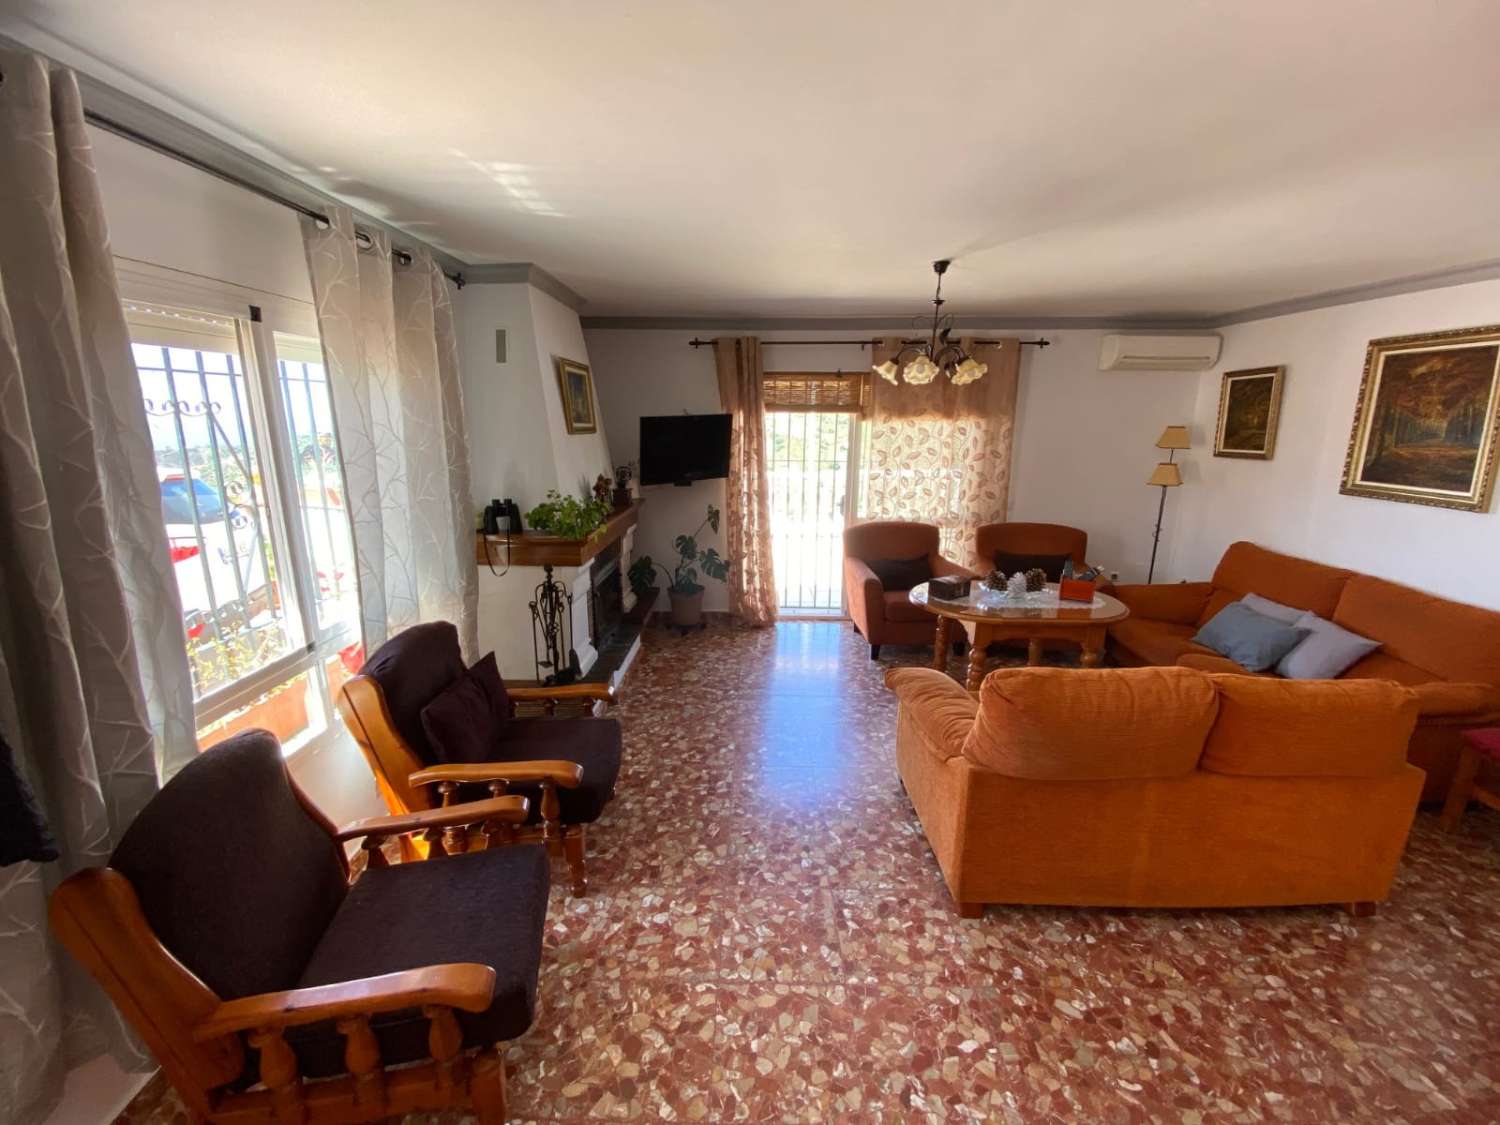 THREE BEDROOM RURAL HOUSE IN TORROX WITH PRIVATE POOL